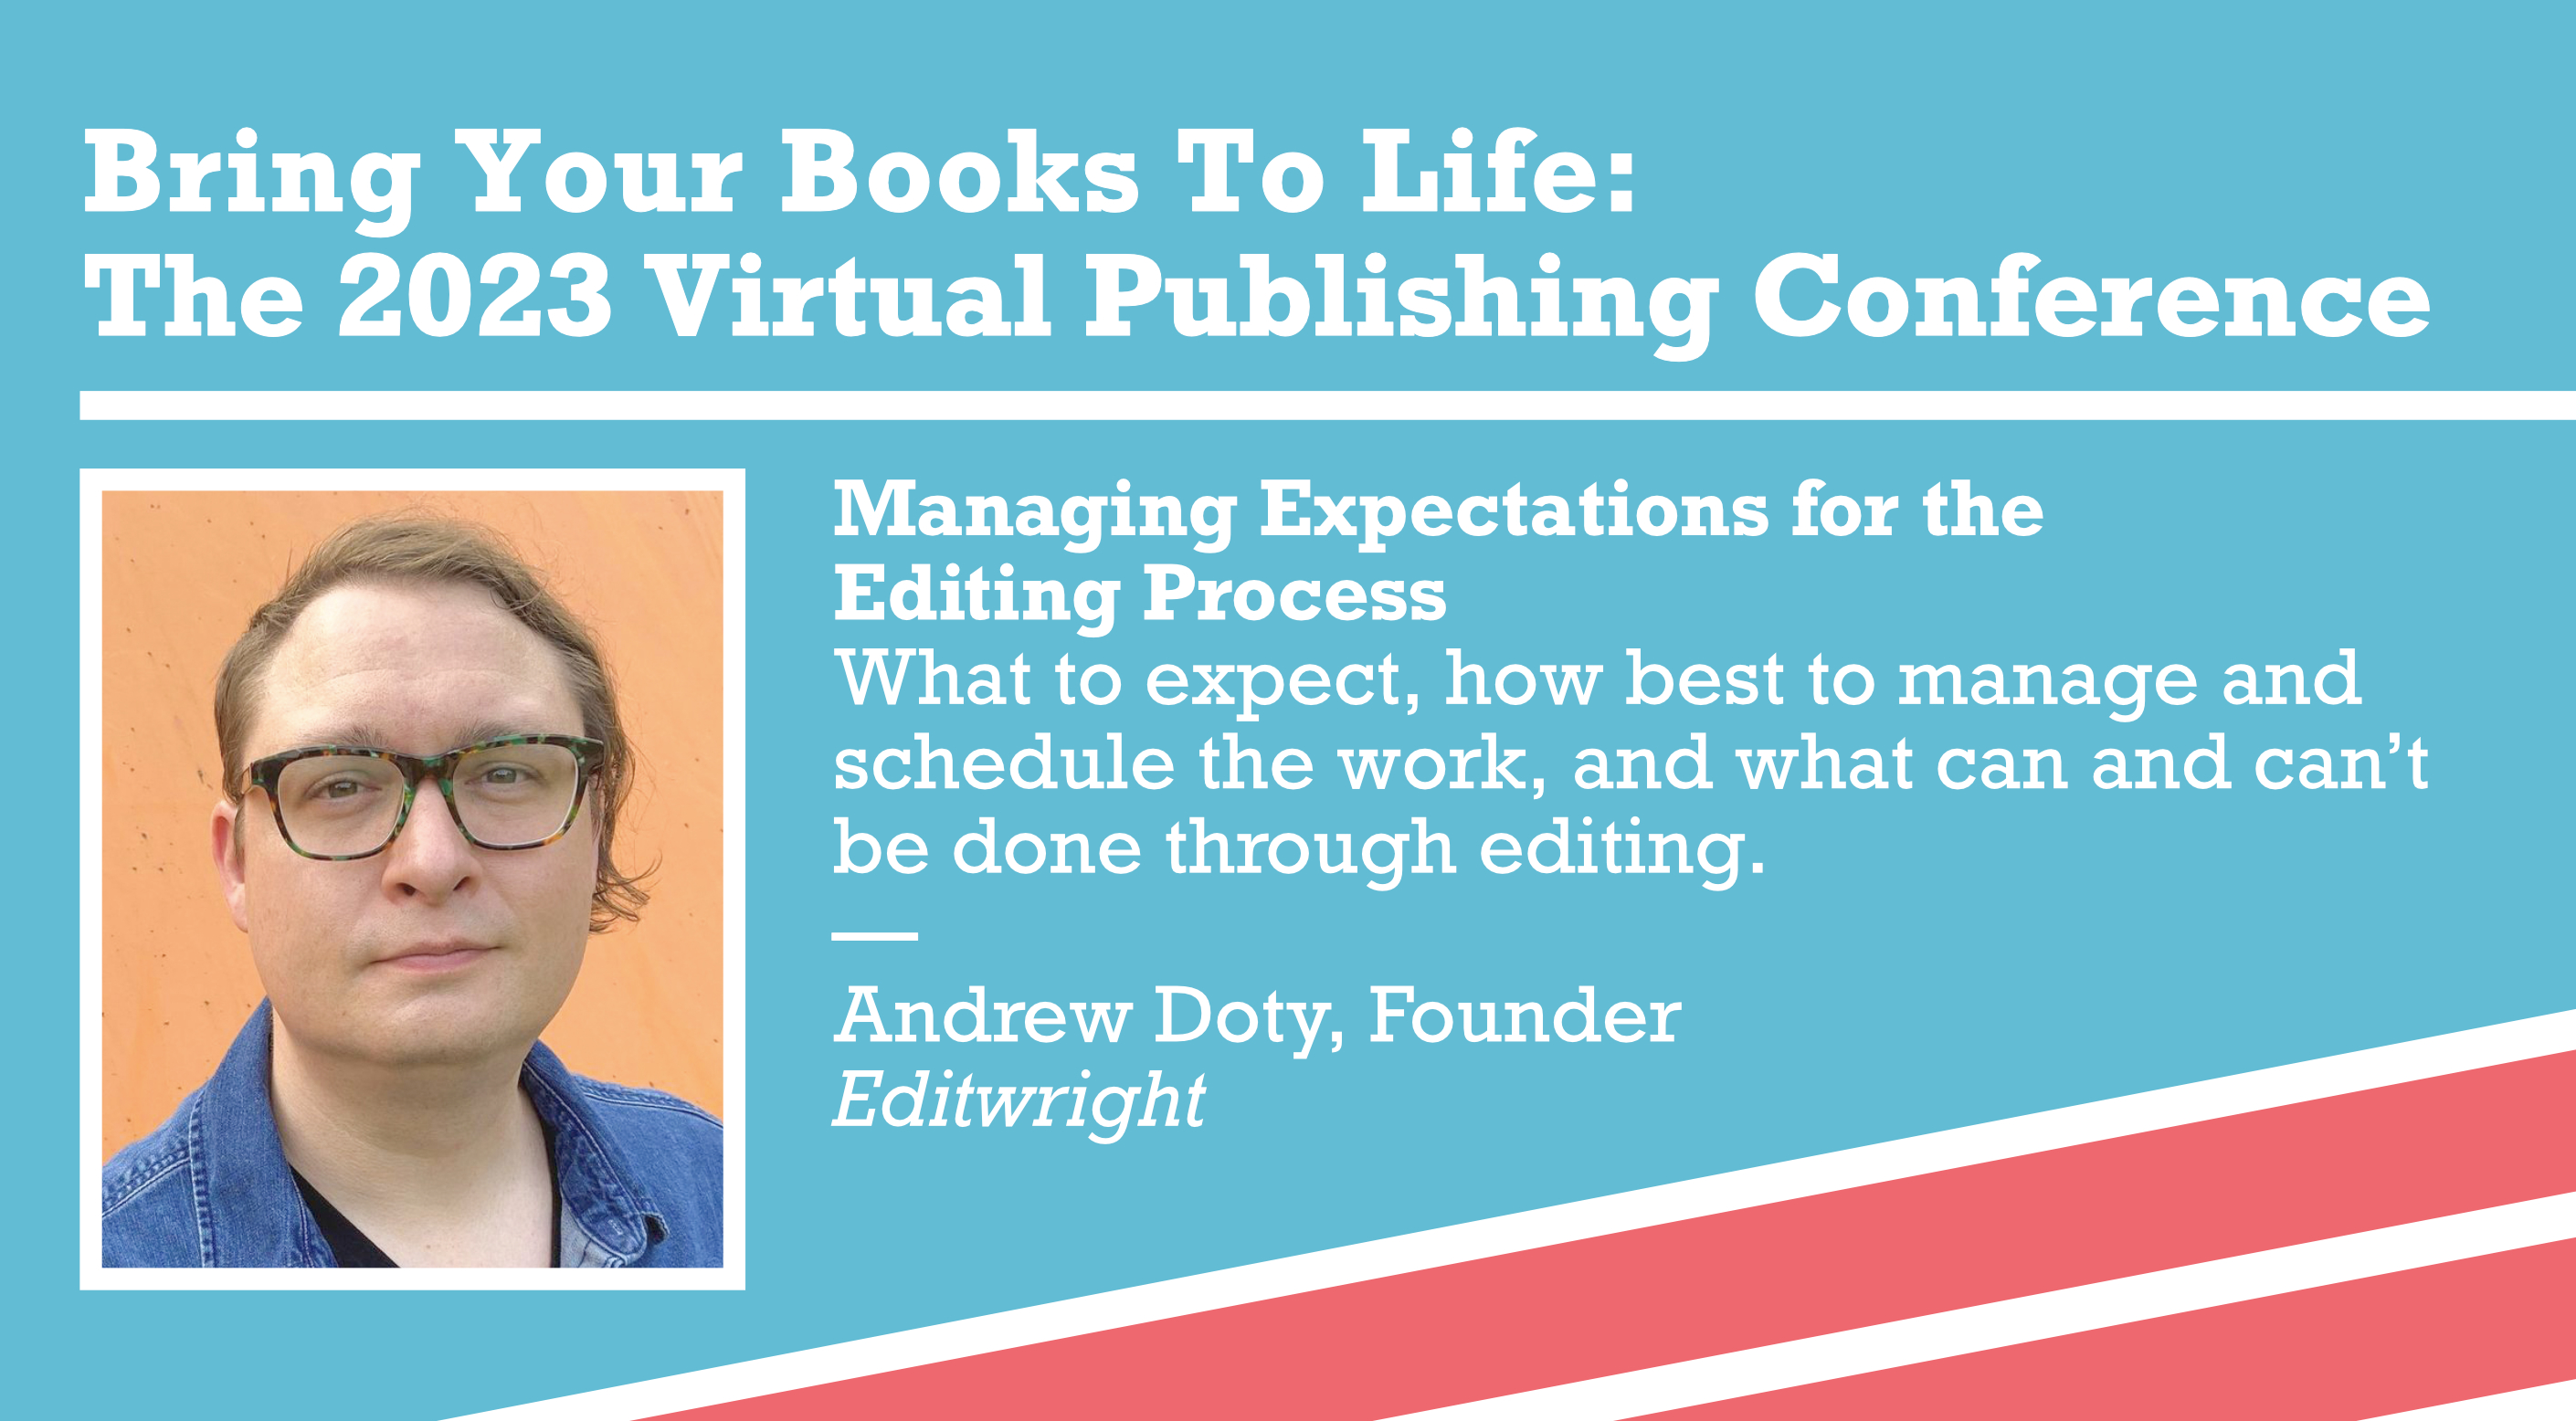 Managing Expectations for the Editing Process — What to expect, how best to manage and schedule the work, and what can and can’t be done through editing. — Andrew Doty, Founder, Editwright